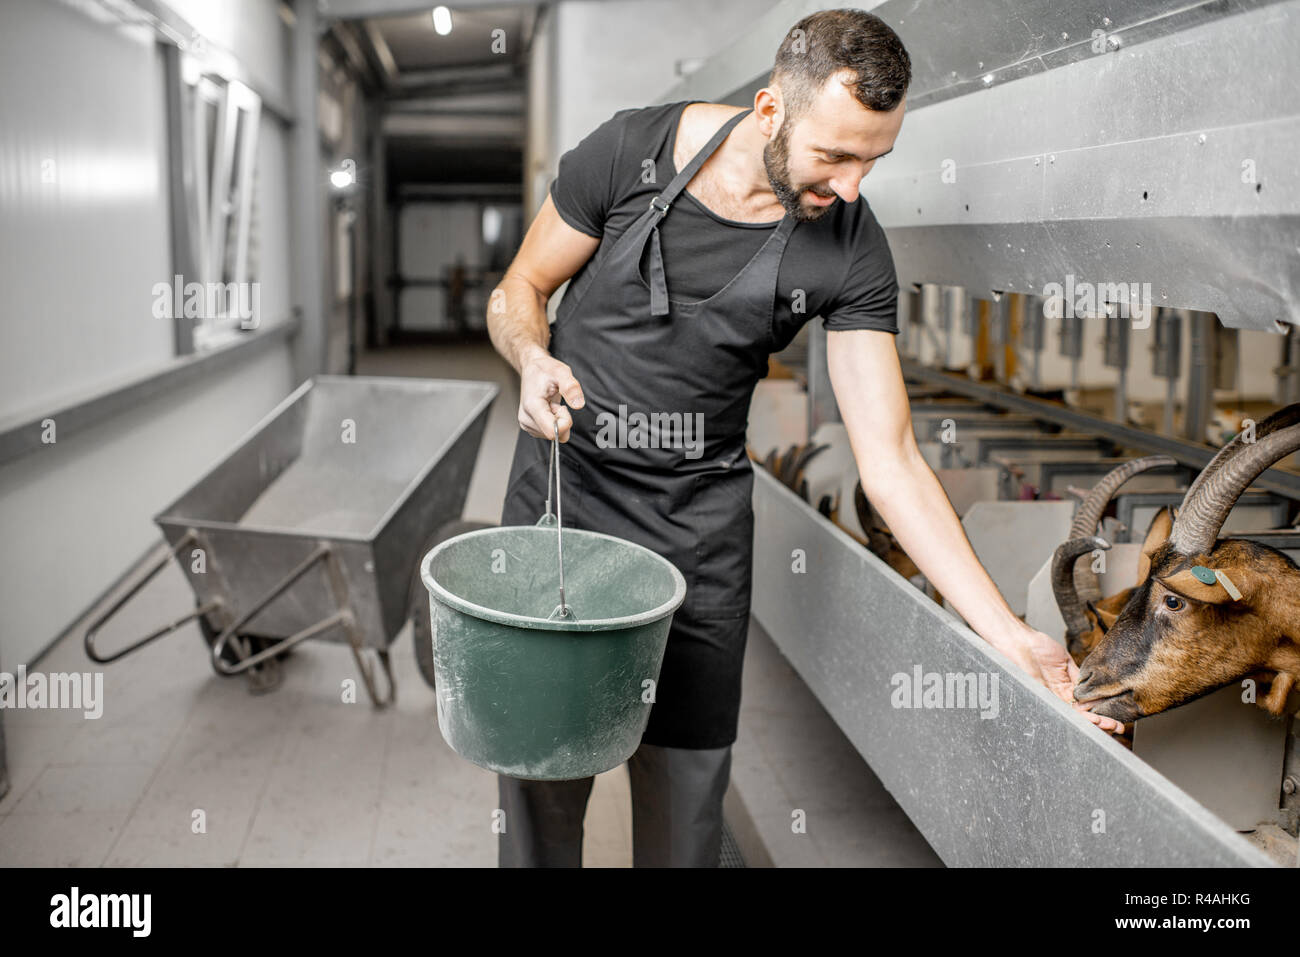 Handsome man feeding goats during the milking process at the automated milking line Stock Photo